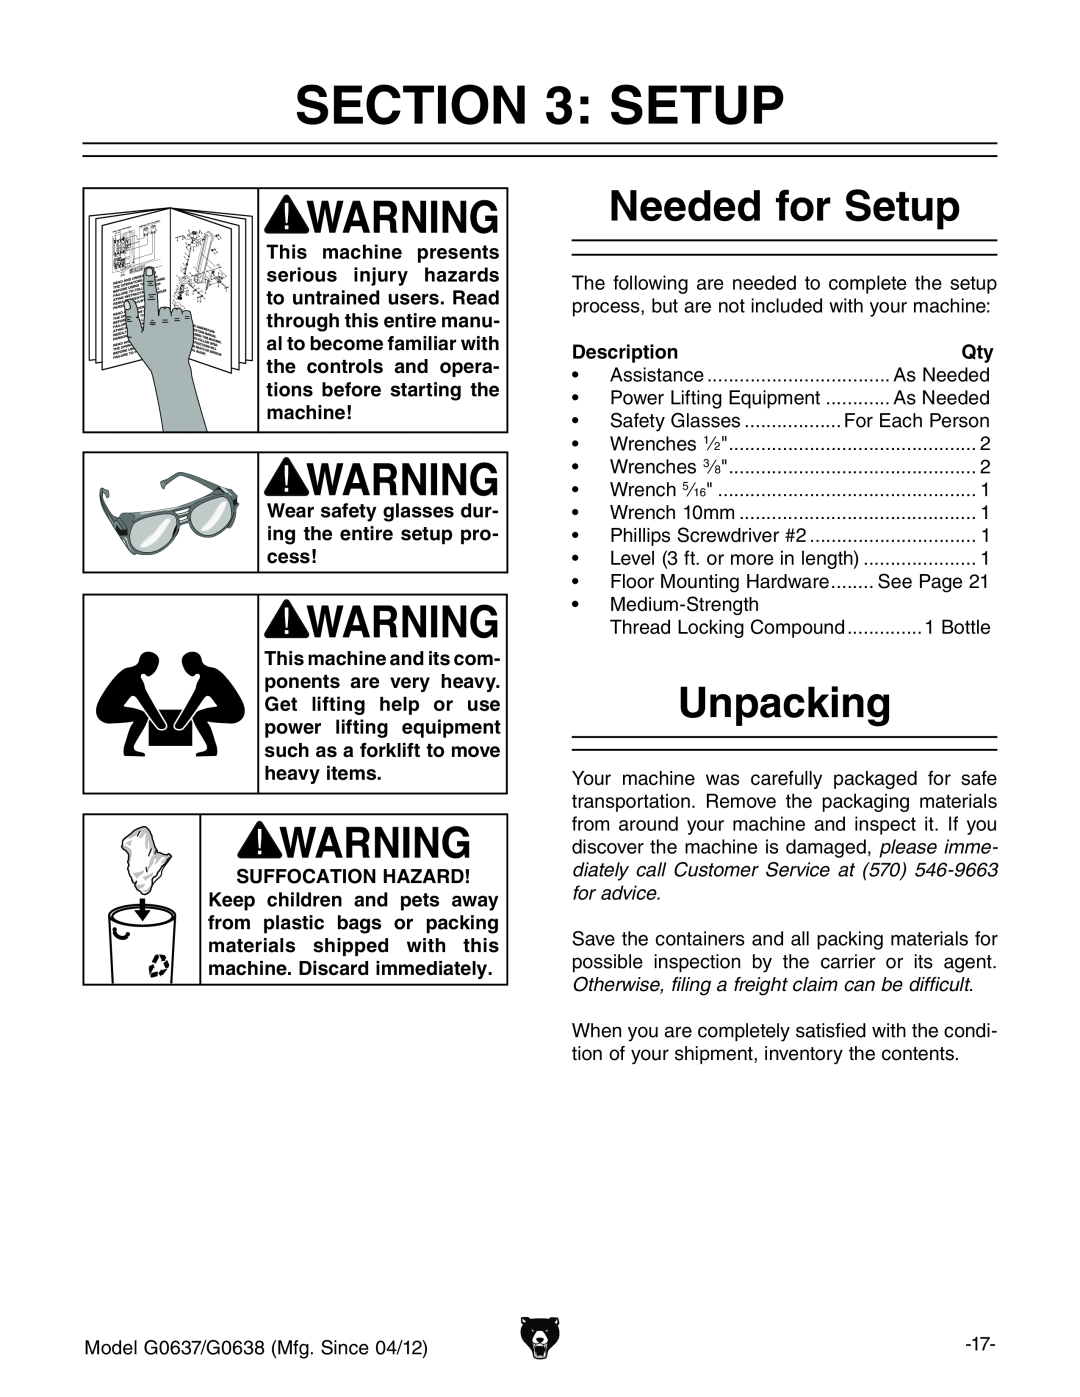 Grizzly G0637 owner manual Needed for Setup, Unpacking, Suffocation Hazard, Description 